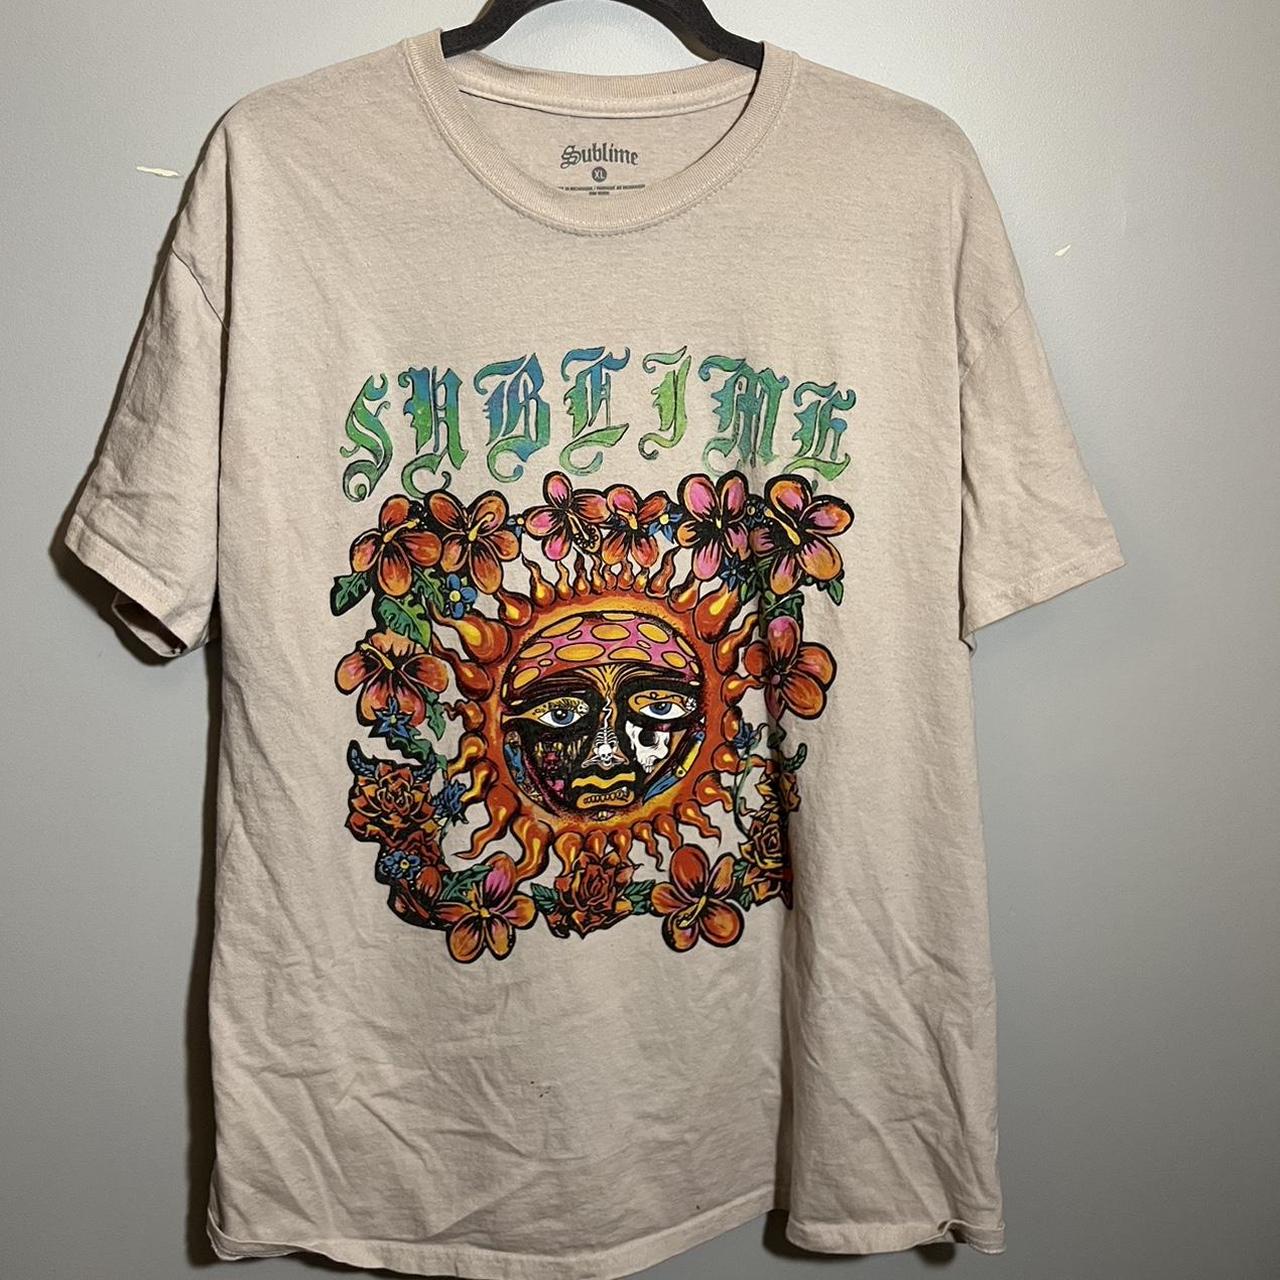 sublime graphic tee - Depop